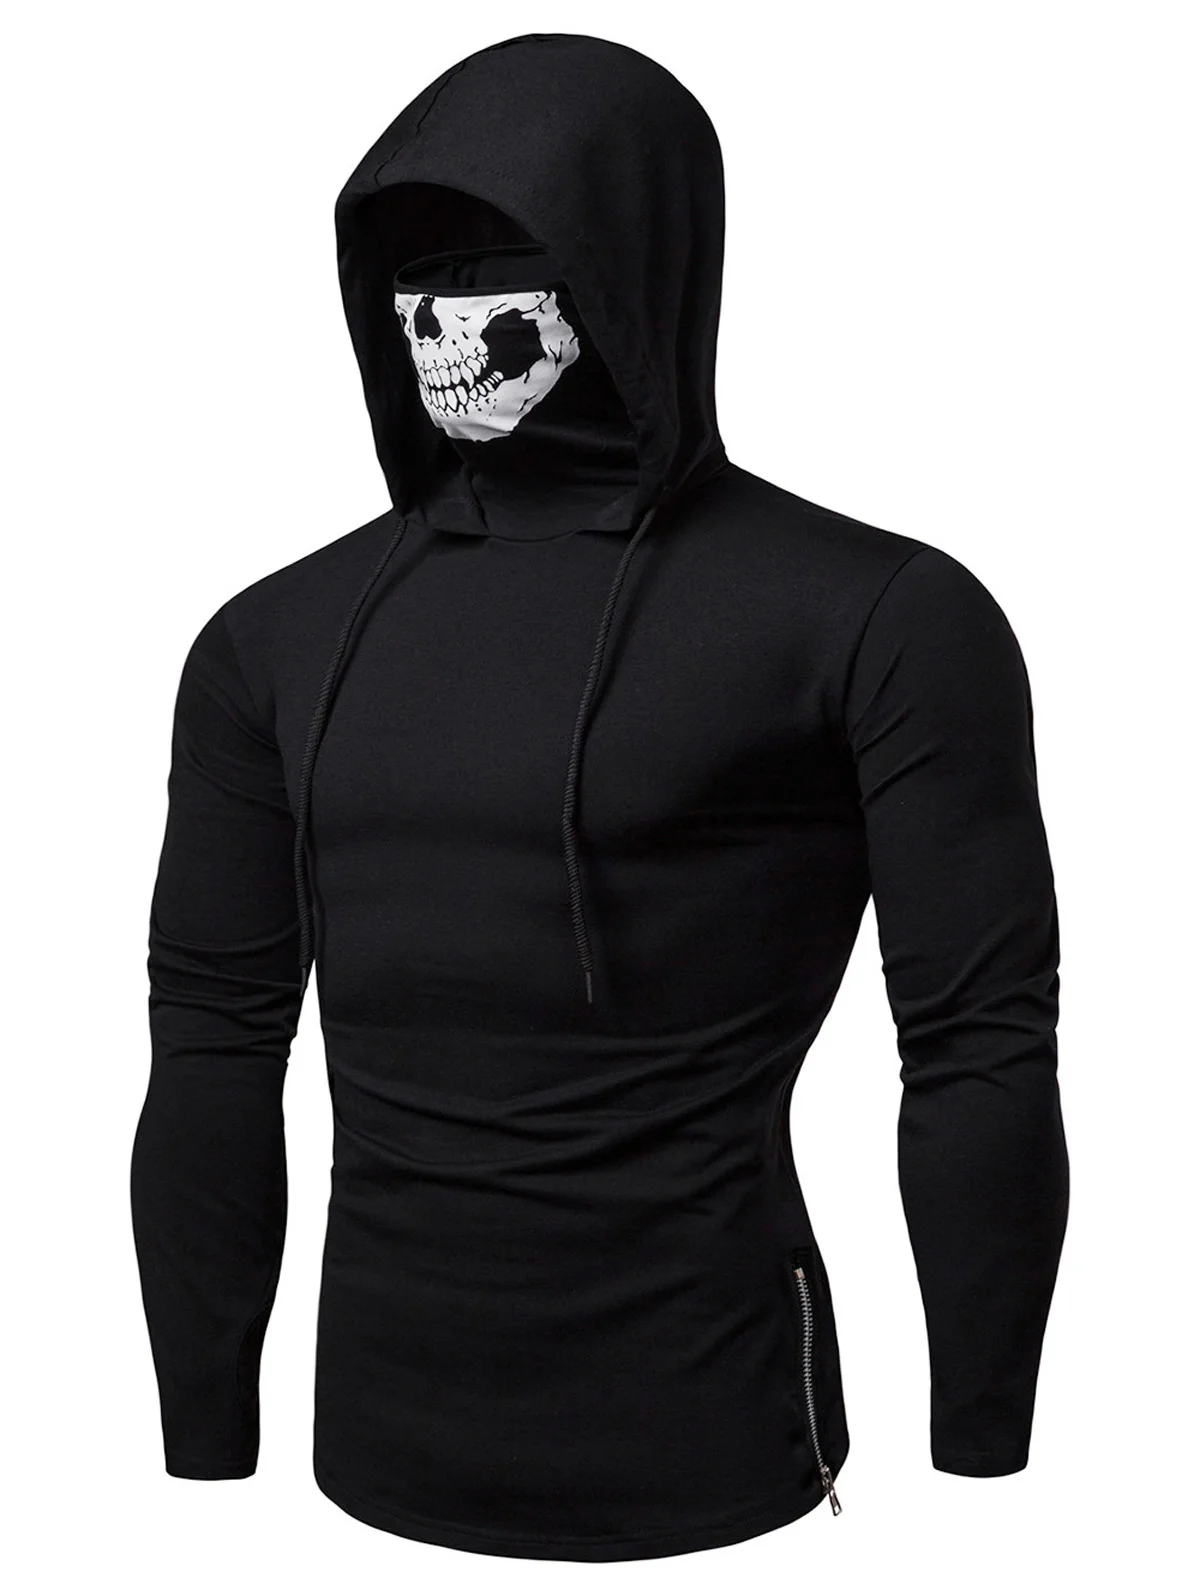 Fashion Men'S Stylish Mask Skull Design Hoodie Contrast Color Drawstring Sweatshirts Hombre Hooded Long Sleeve Pullovers For Man